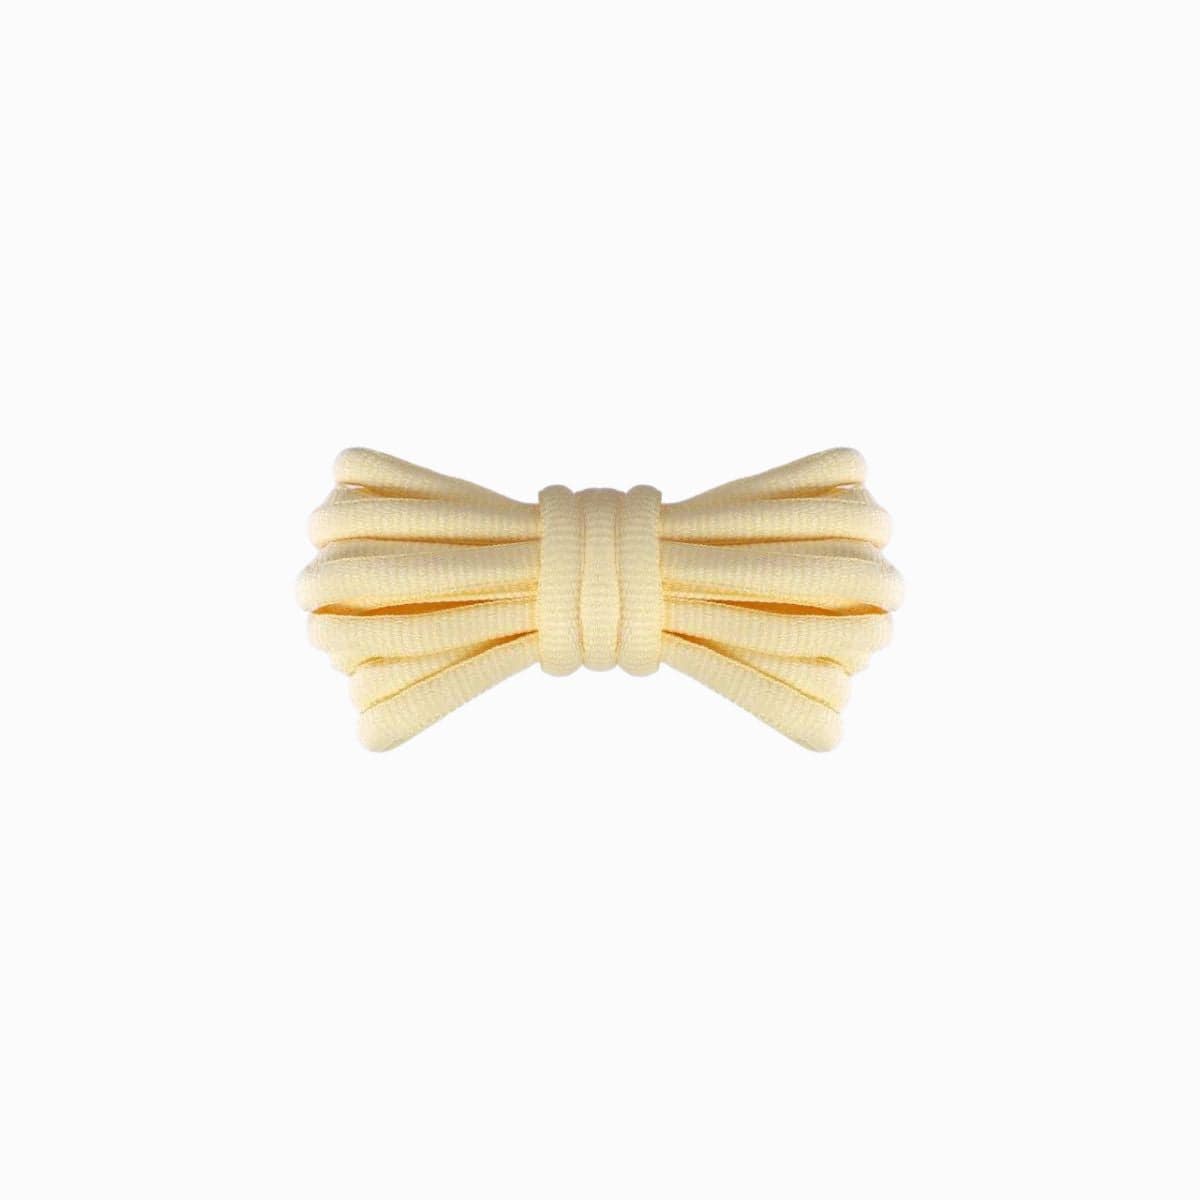 Light Yellow Replacement Adidas Shoe Laces for Adidas Spezial Sneakers by Kicks Shoelaces